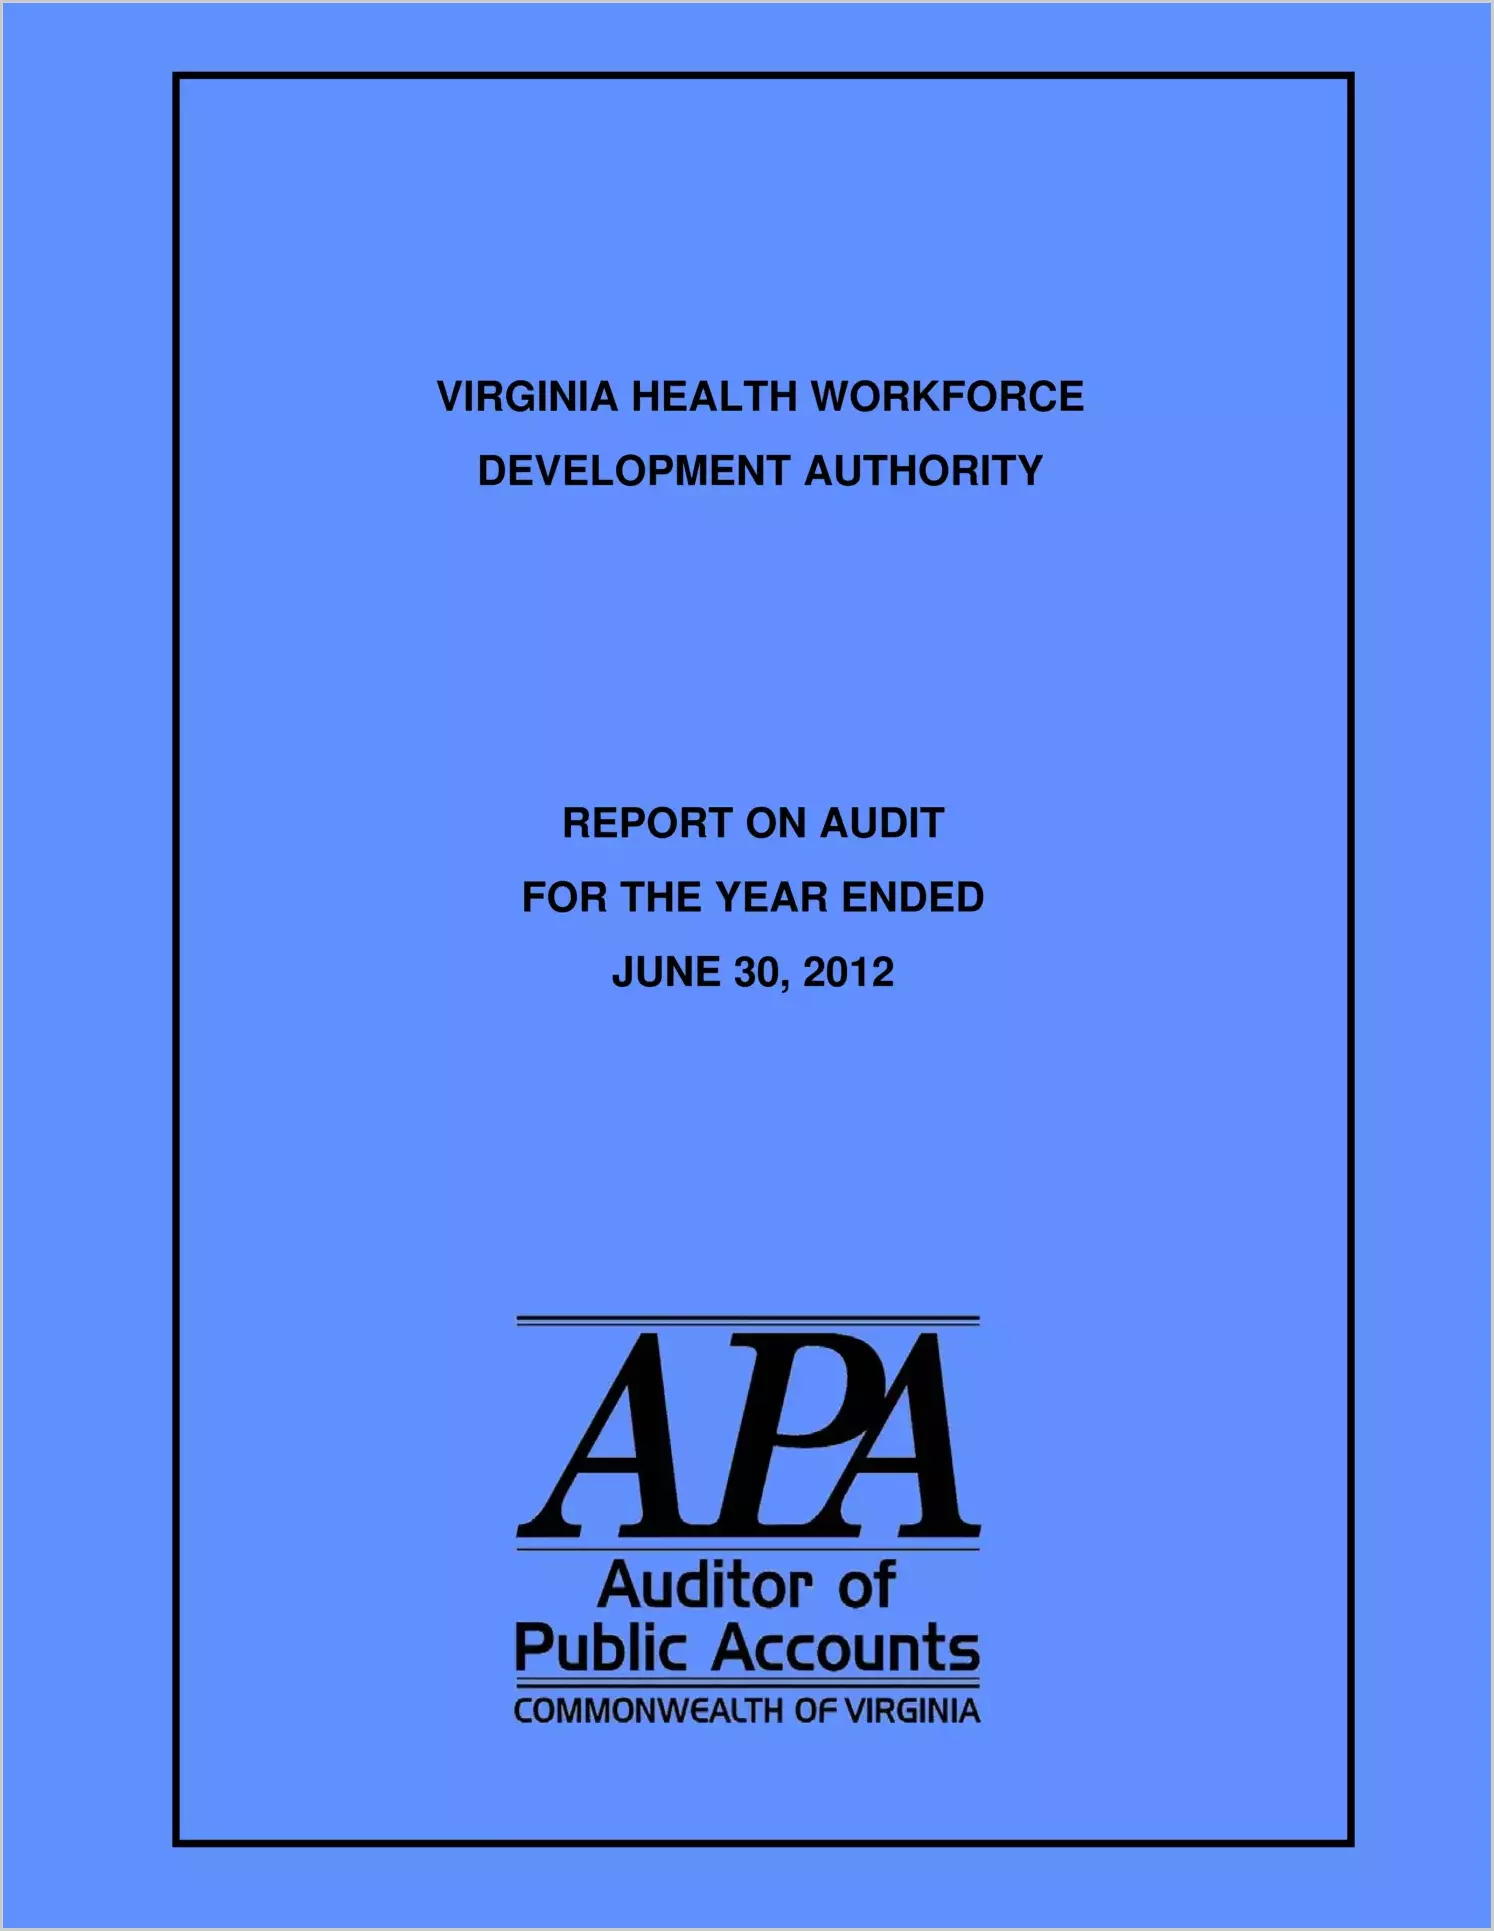 Virginia Health Workforce Development Authority report on audit for the year ended June 30, 2012